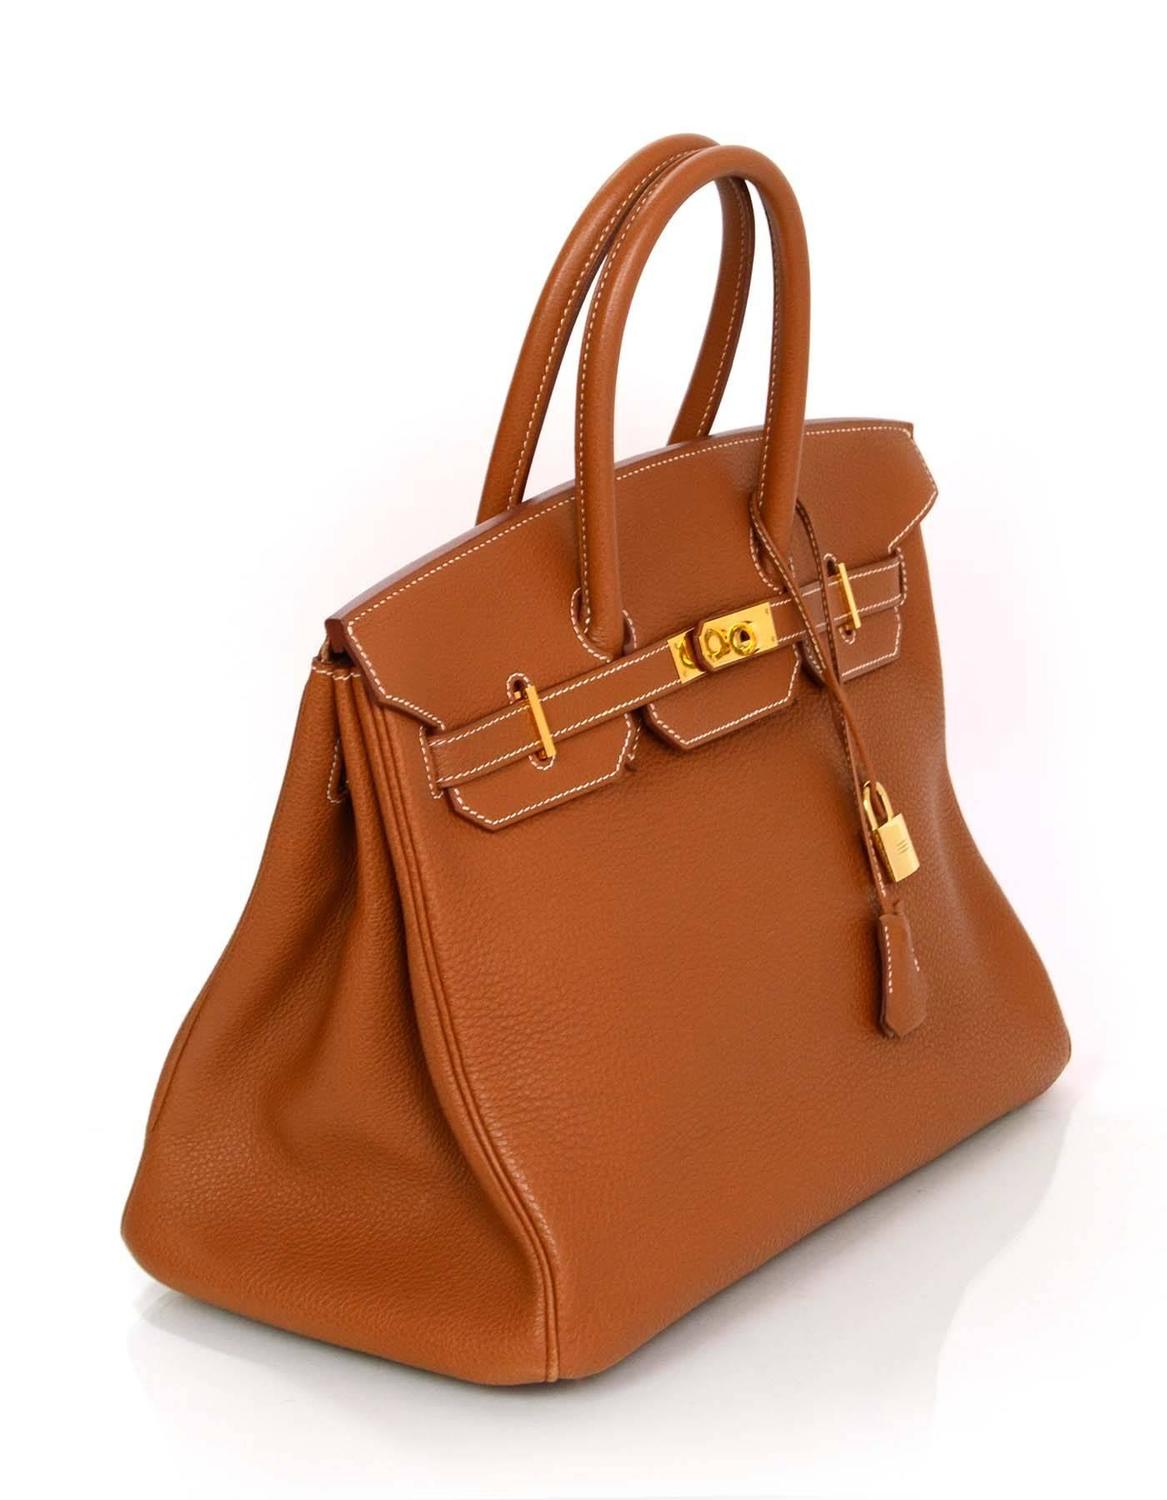 Hermes Tan Gold Togo Leather 35cm Birkin Bag GHW w/ Box and Dust Bag For Sale at 1stdibs